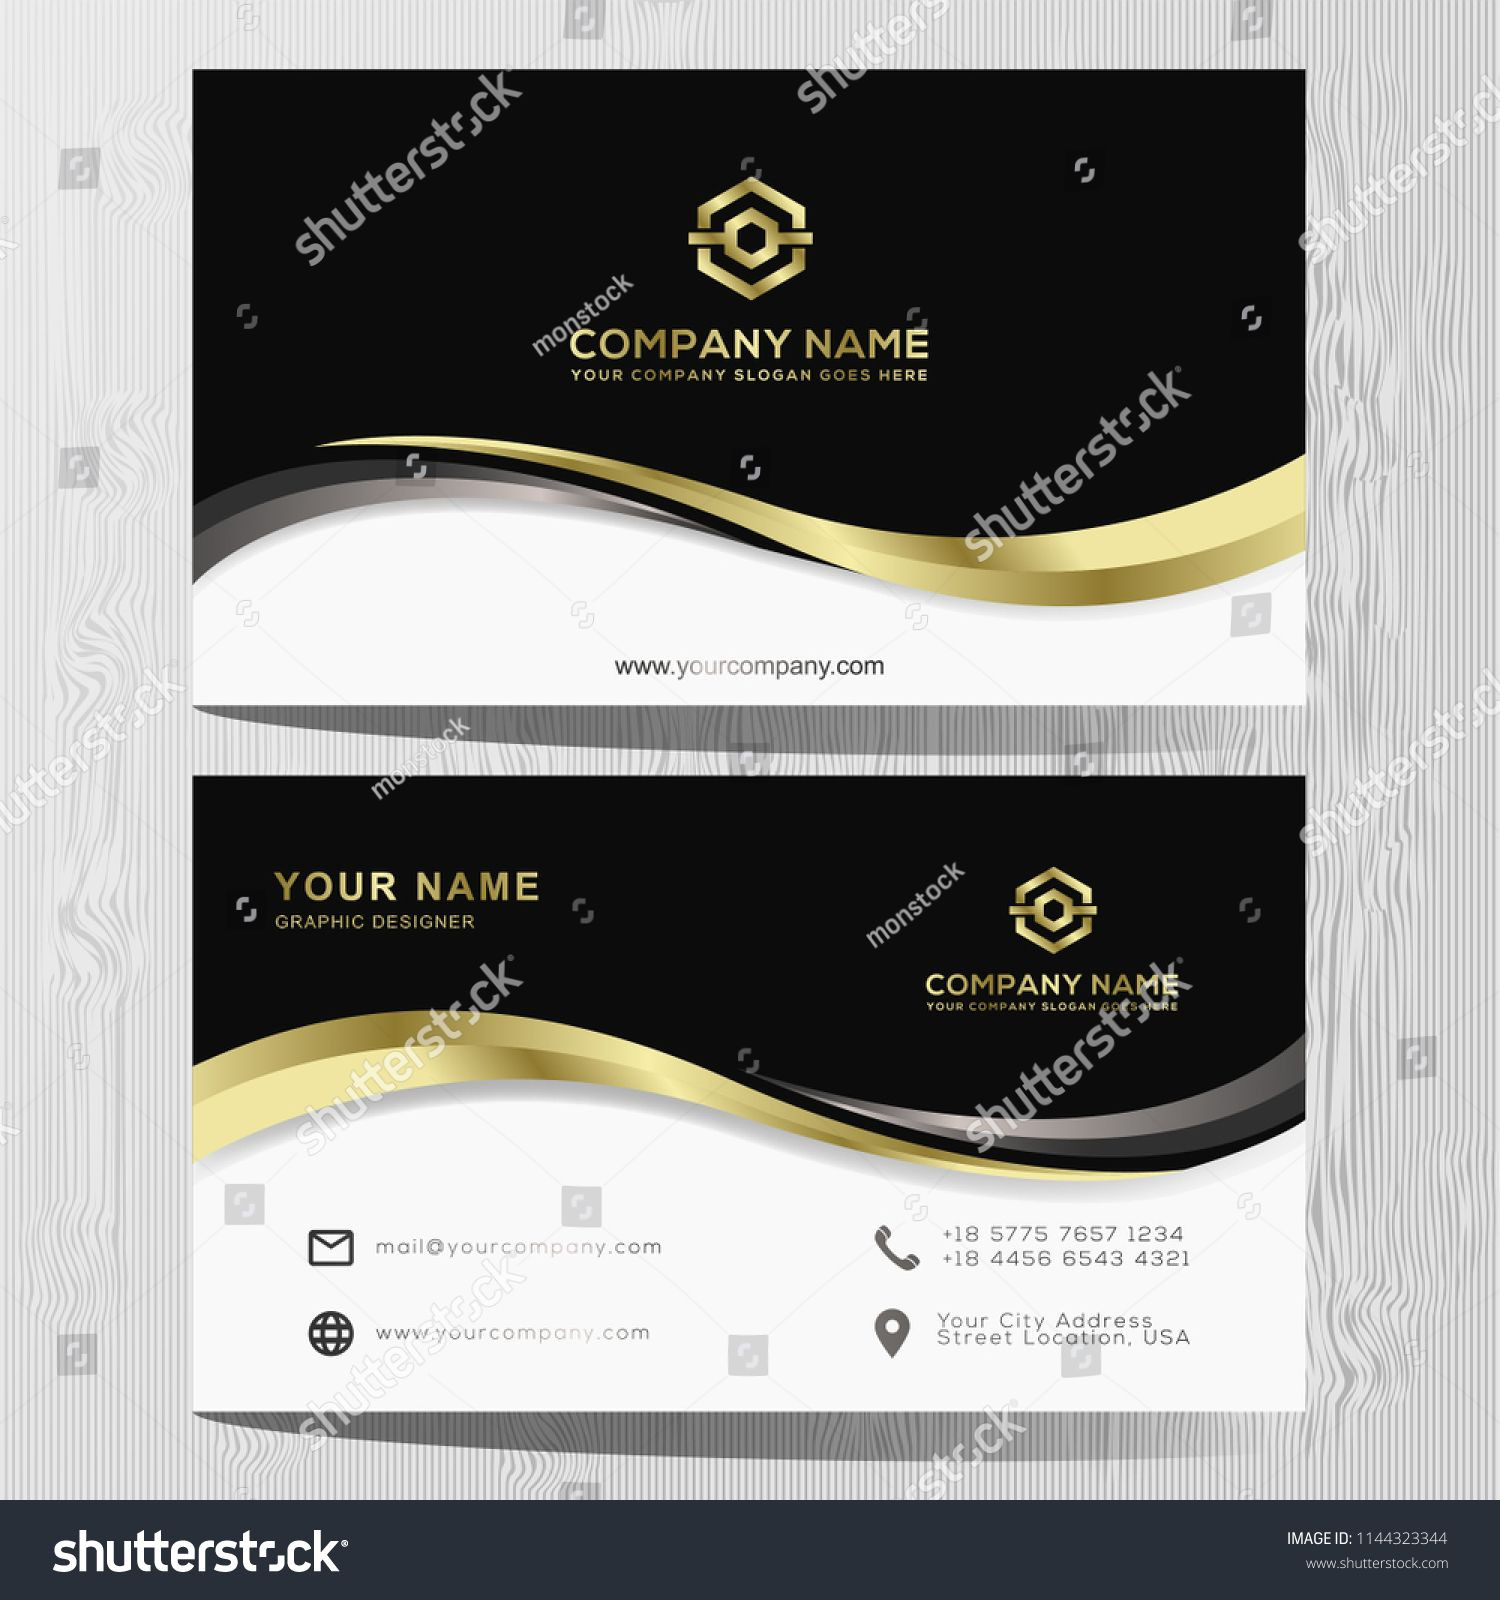 Luxury and Elegant Black Gold Business Cards Template On Of Business Card Template Black